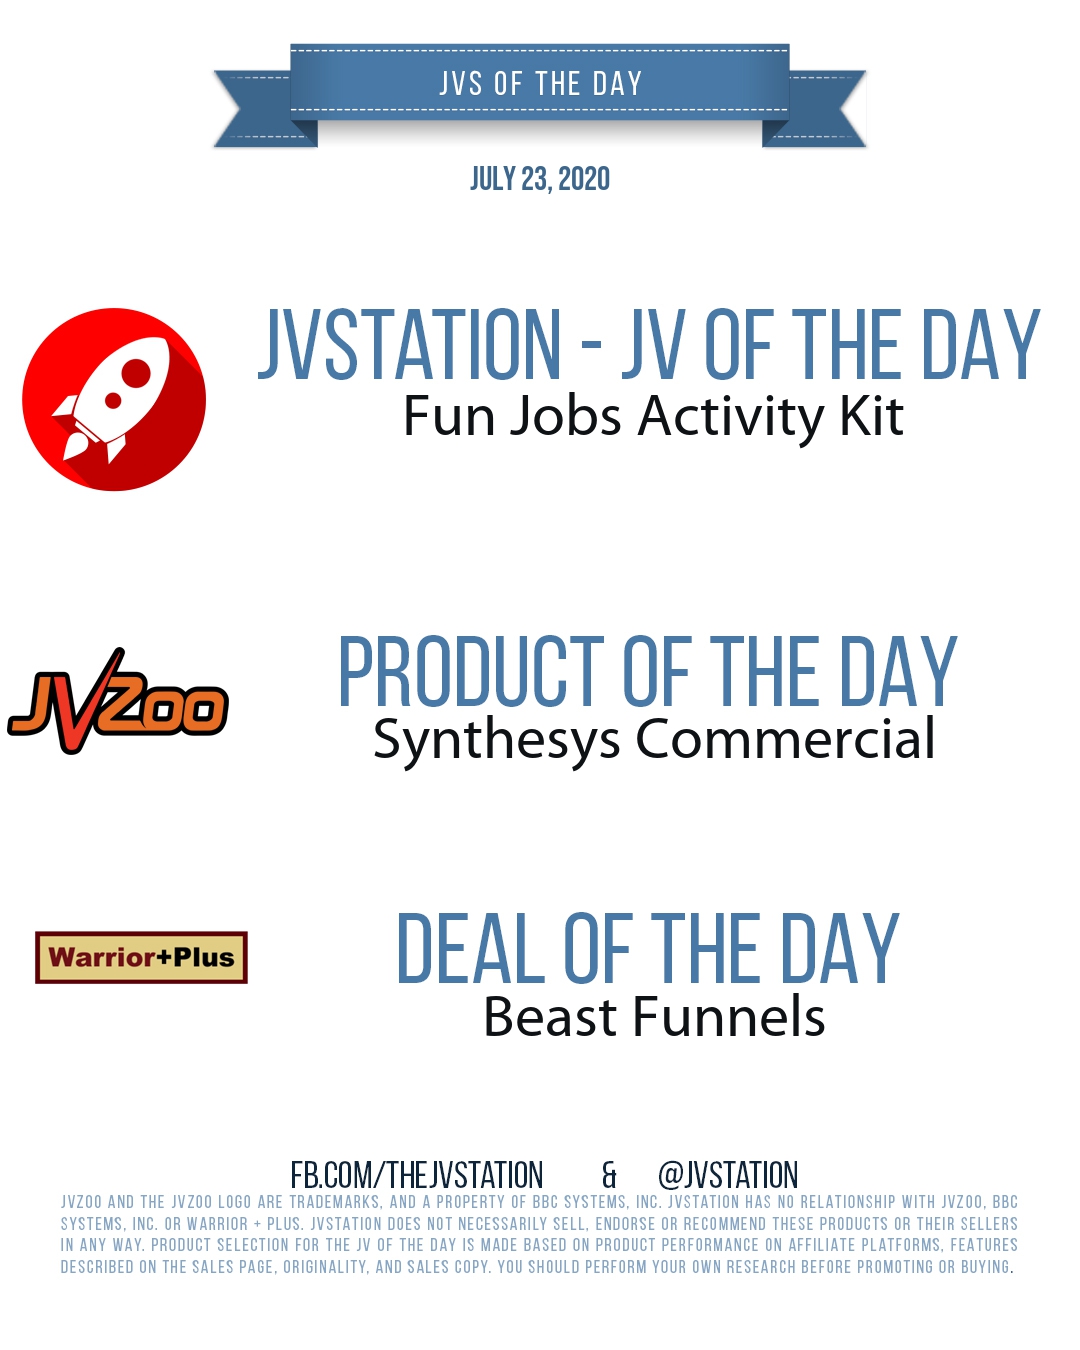 JVs of the day - July 23, 2020